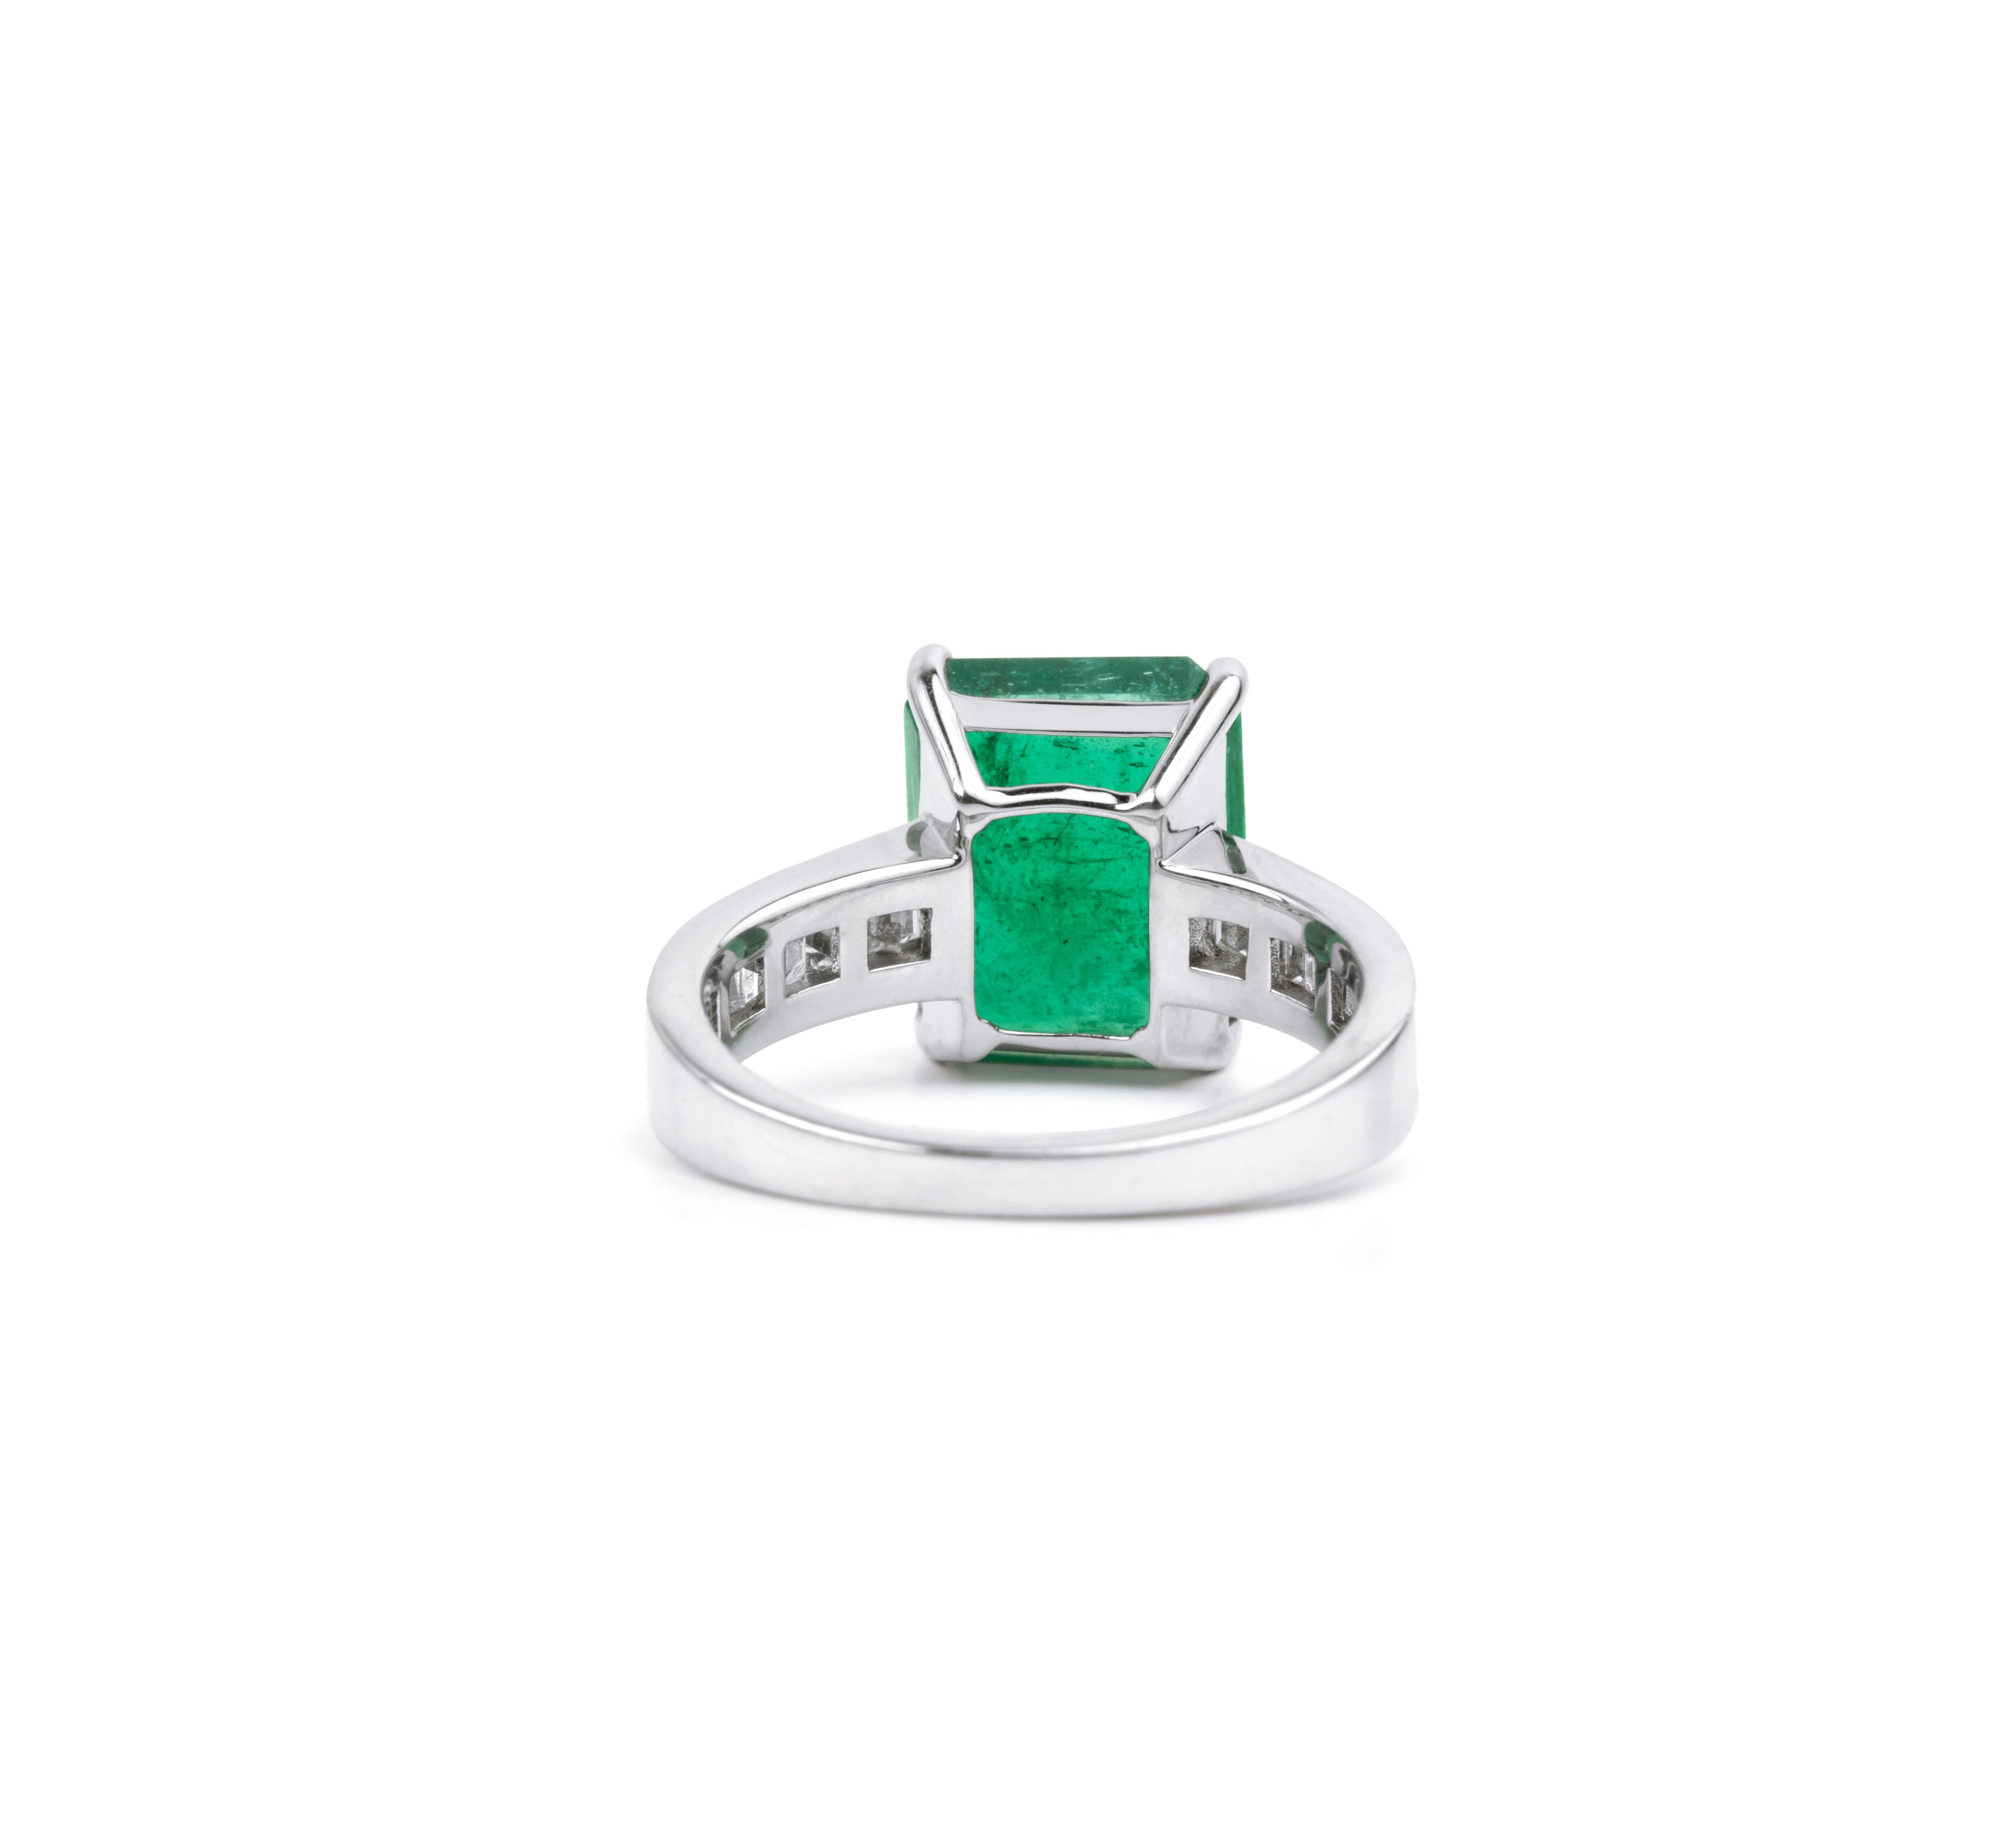 4 Carat Natural Emerald Diamond Cocktail Engagement Ring 18k White Gold In New Condition For Sale In Jaipur, RJ